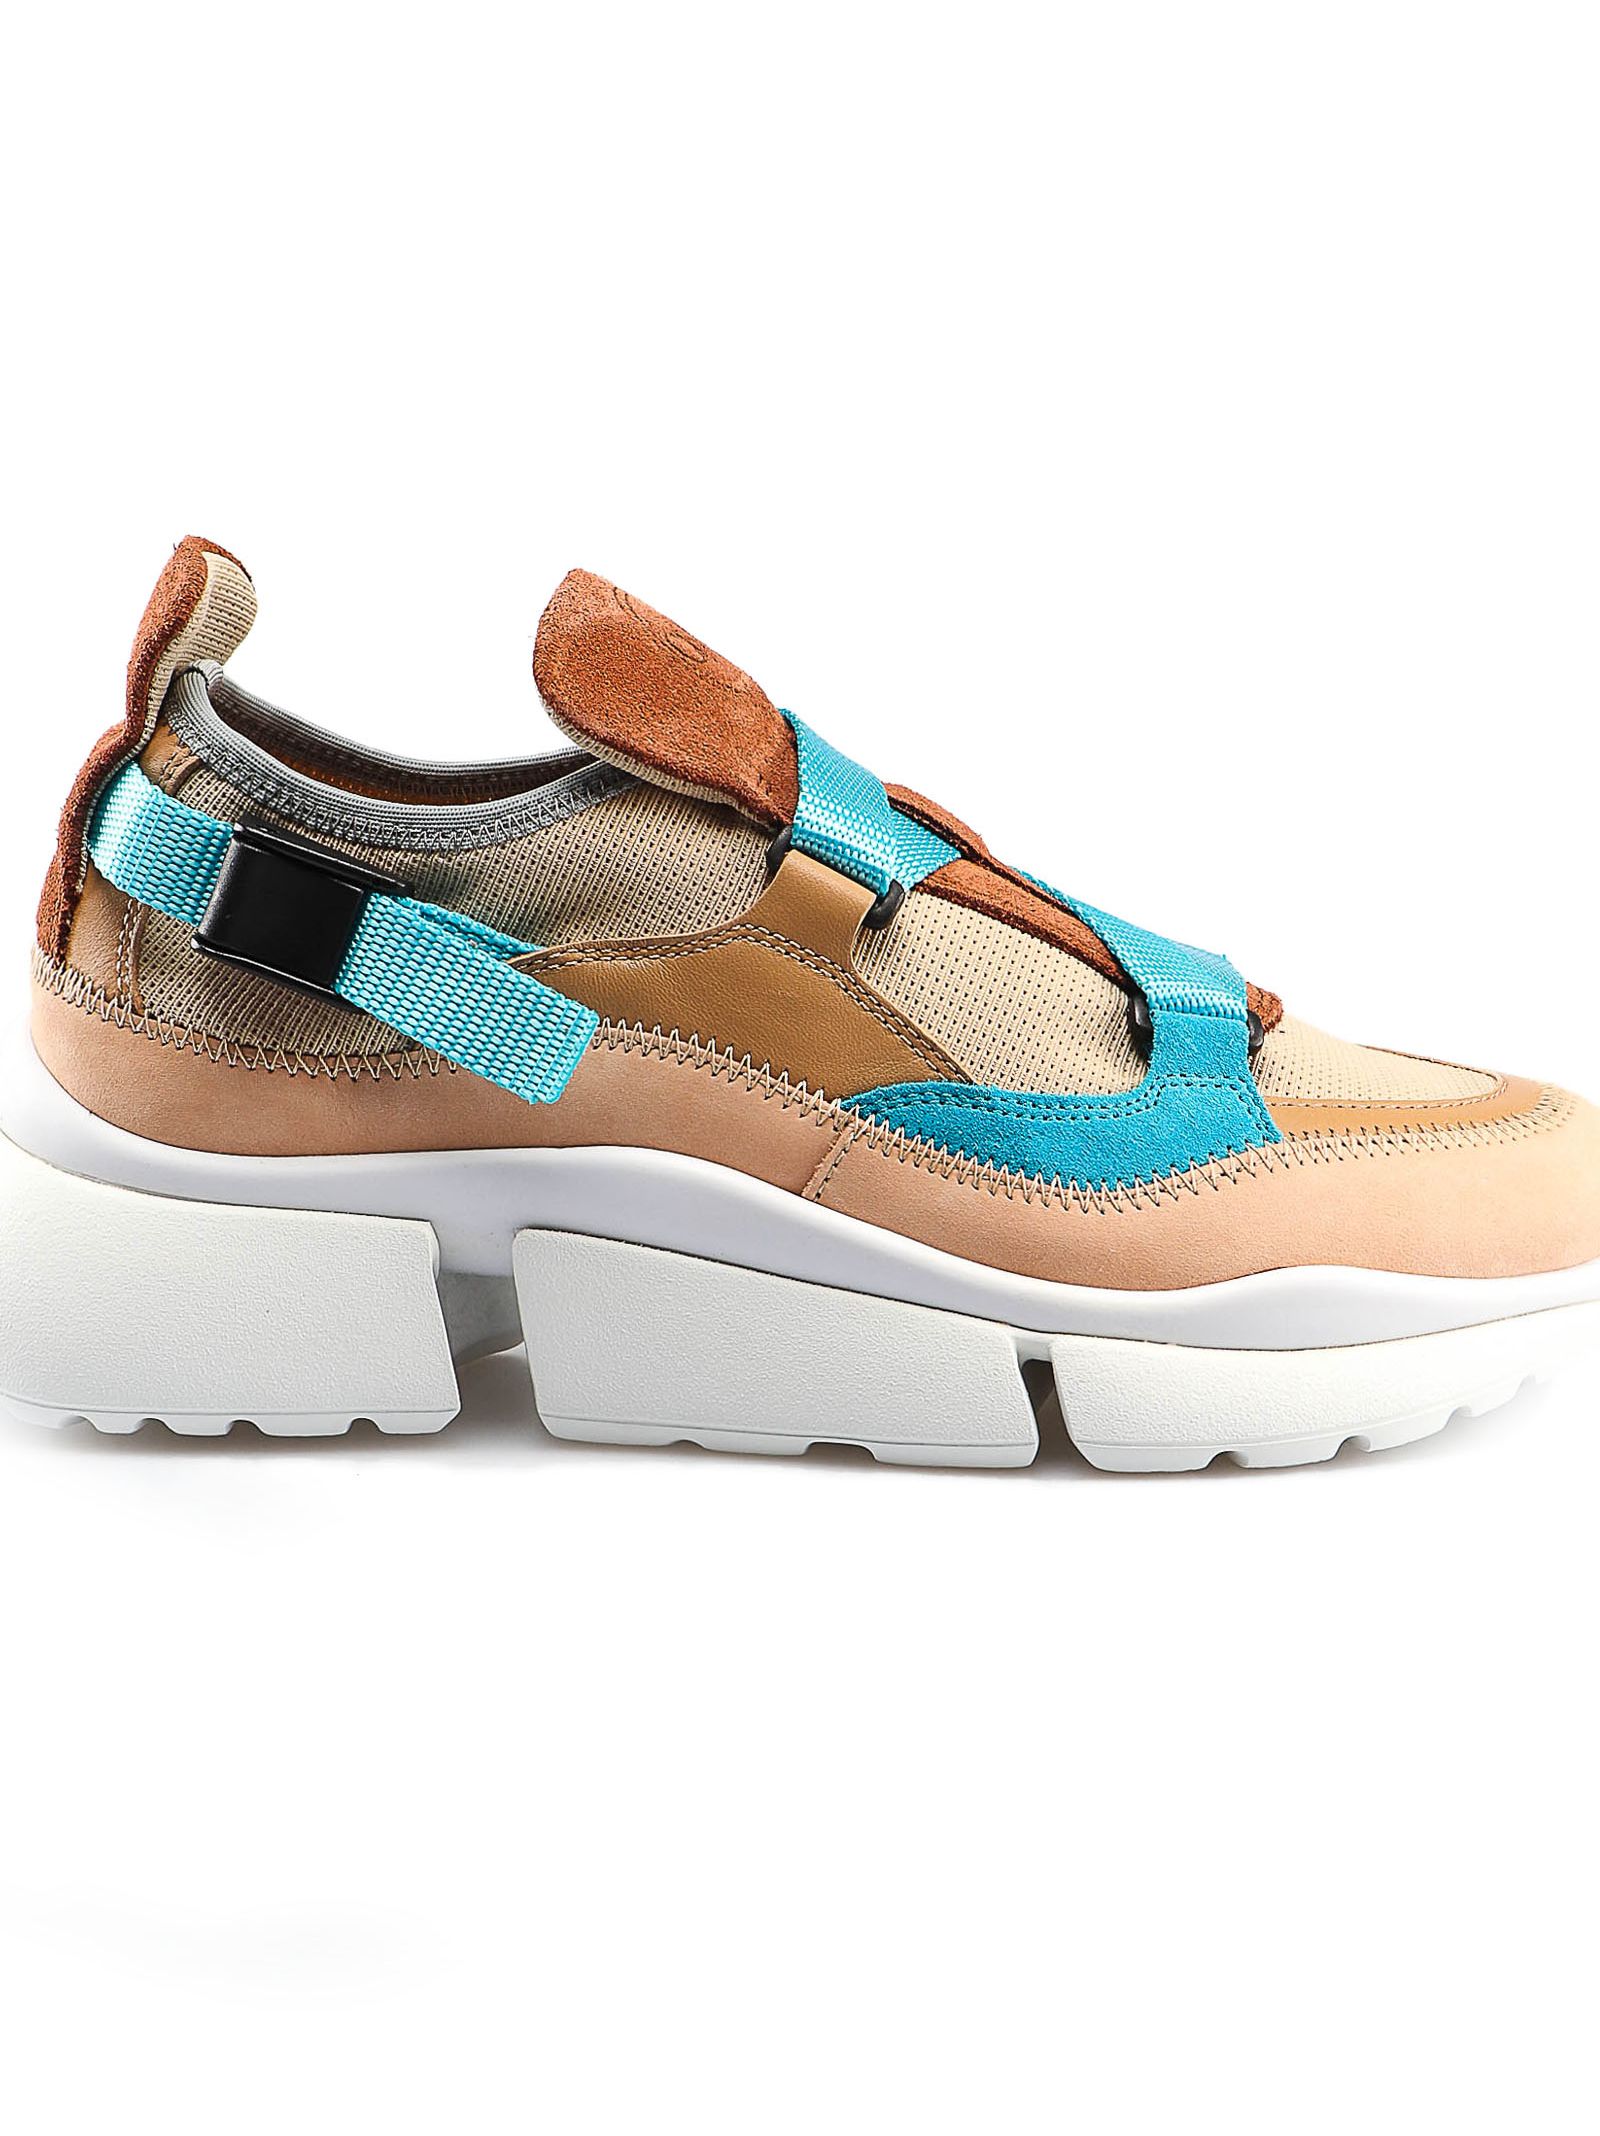 CHLOÉ BUCKLED STRAP SNEAKERS,10875921